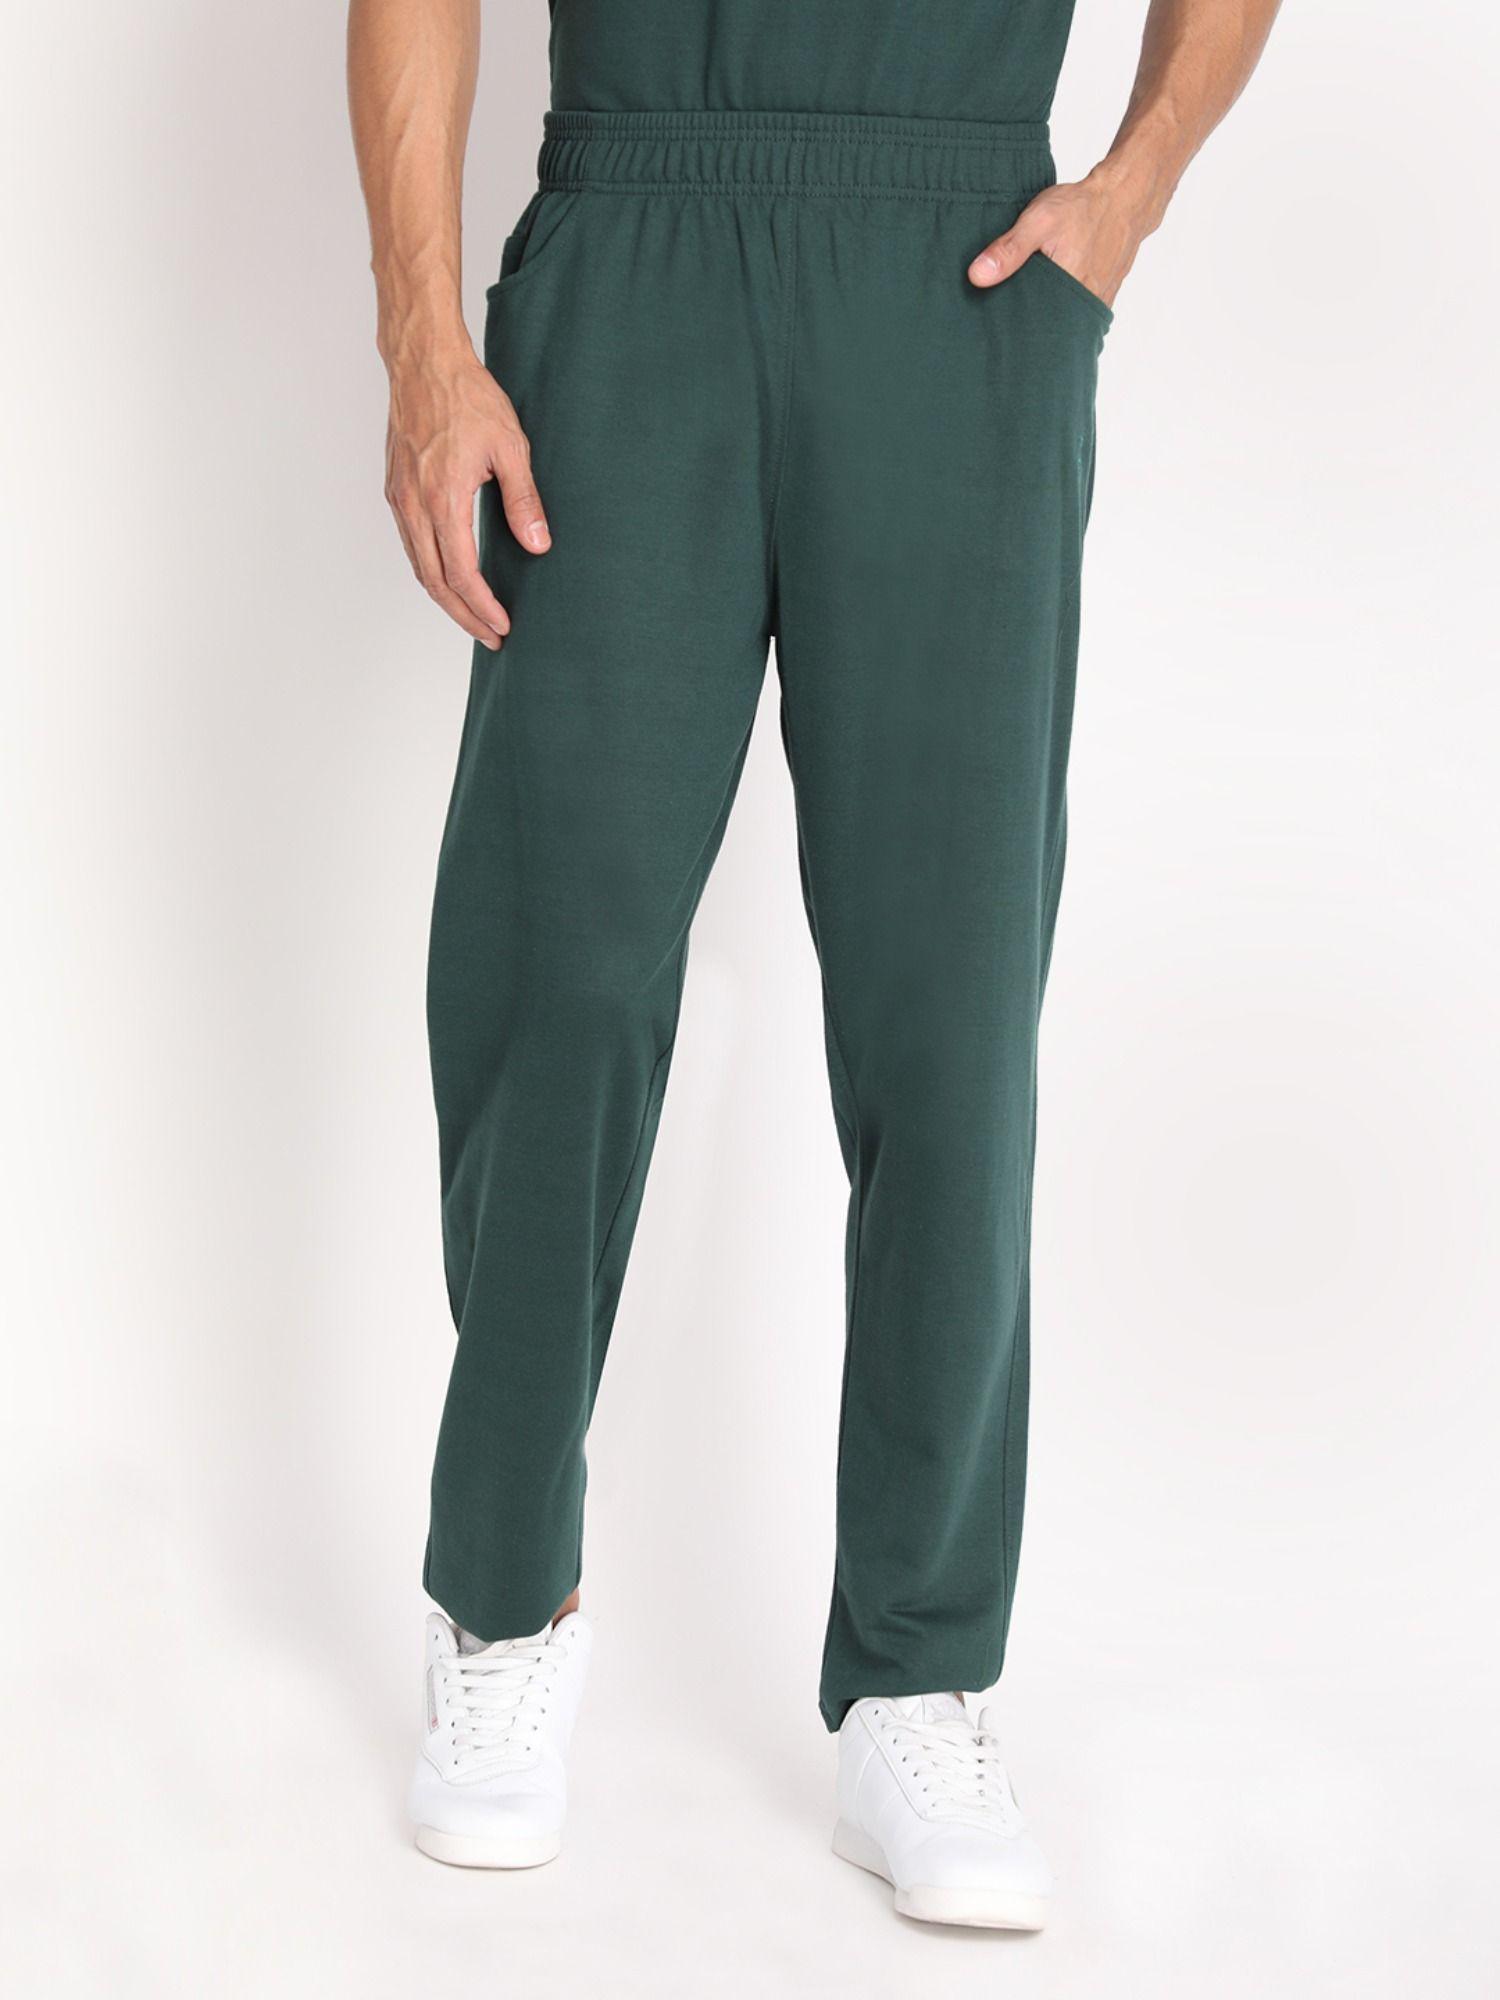 mens cotton comfort fit green lower